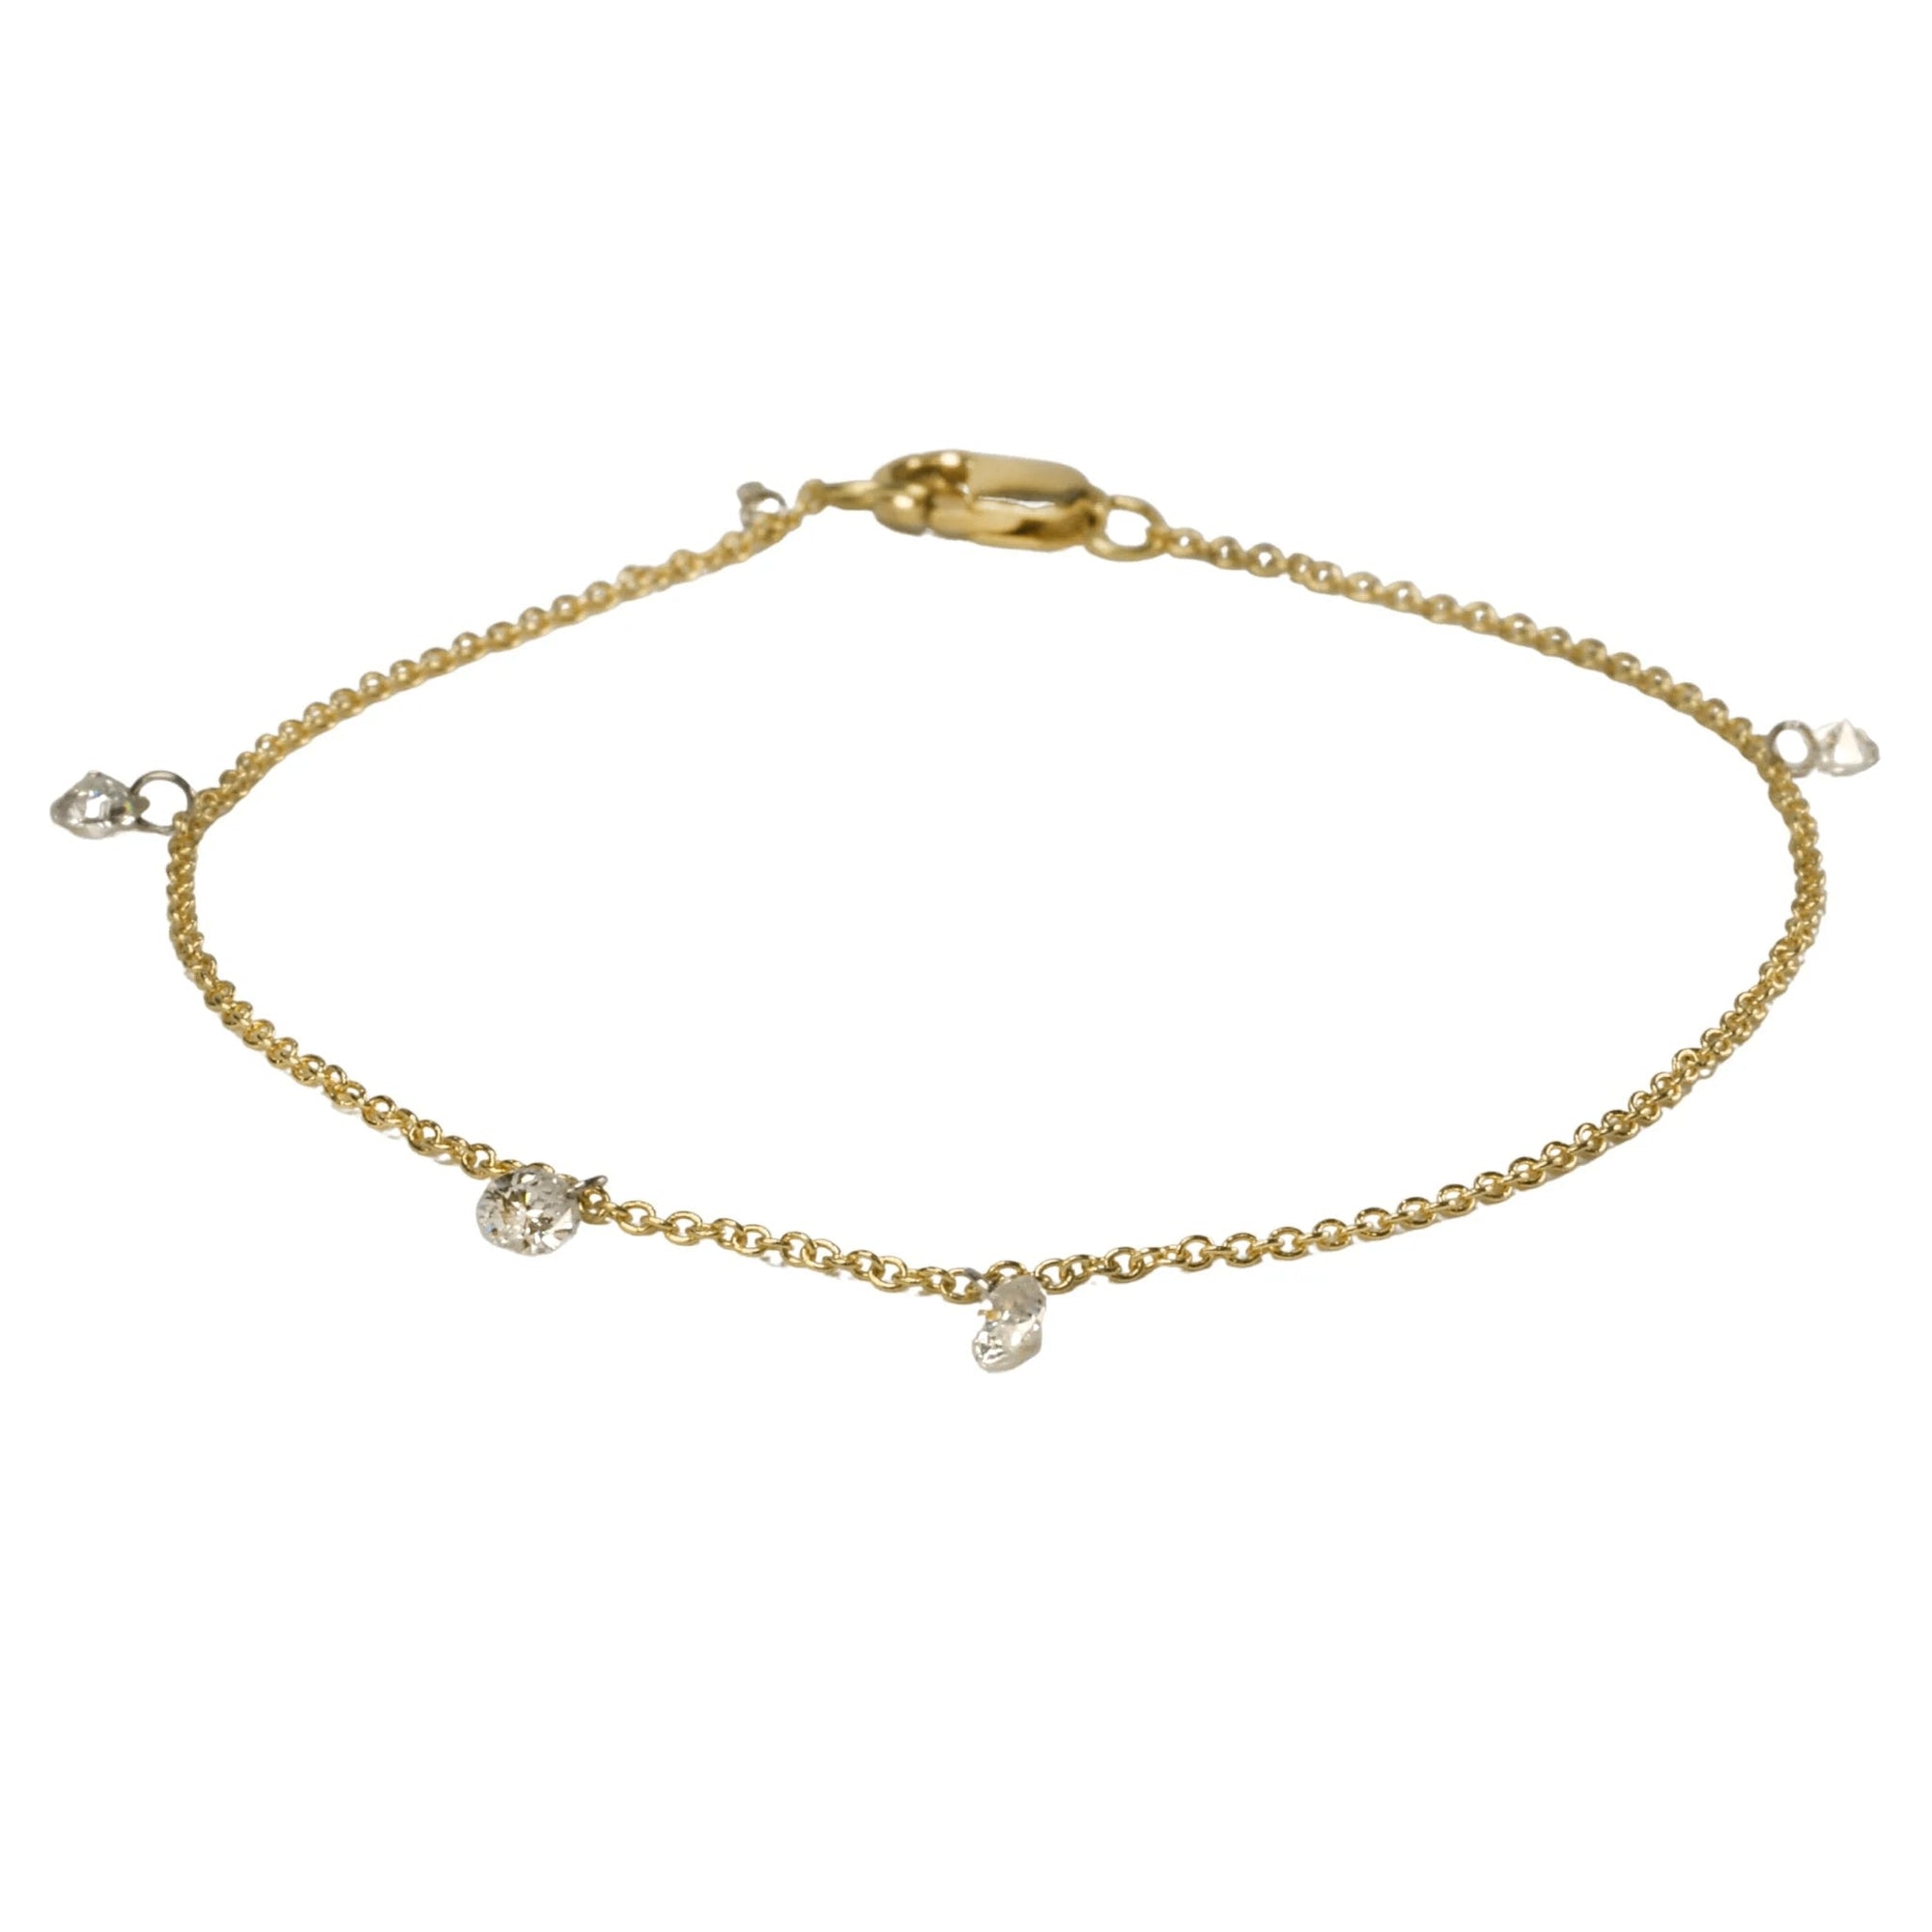 18K Gold Chain Bracelet with Four Free-Set Pear-Shaped Diamonds - Peridot Fine Jewelry - TAP by Todd Pownell